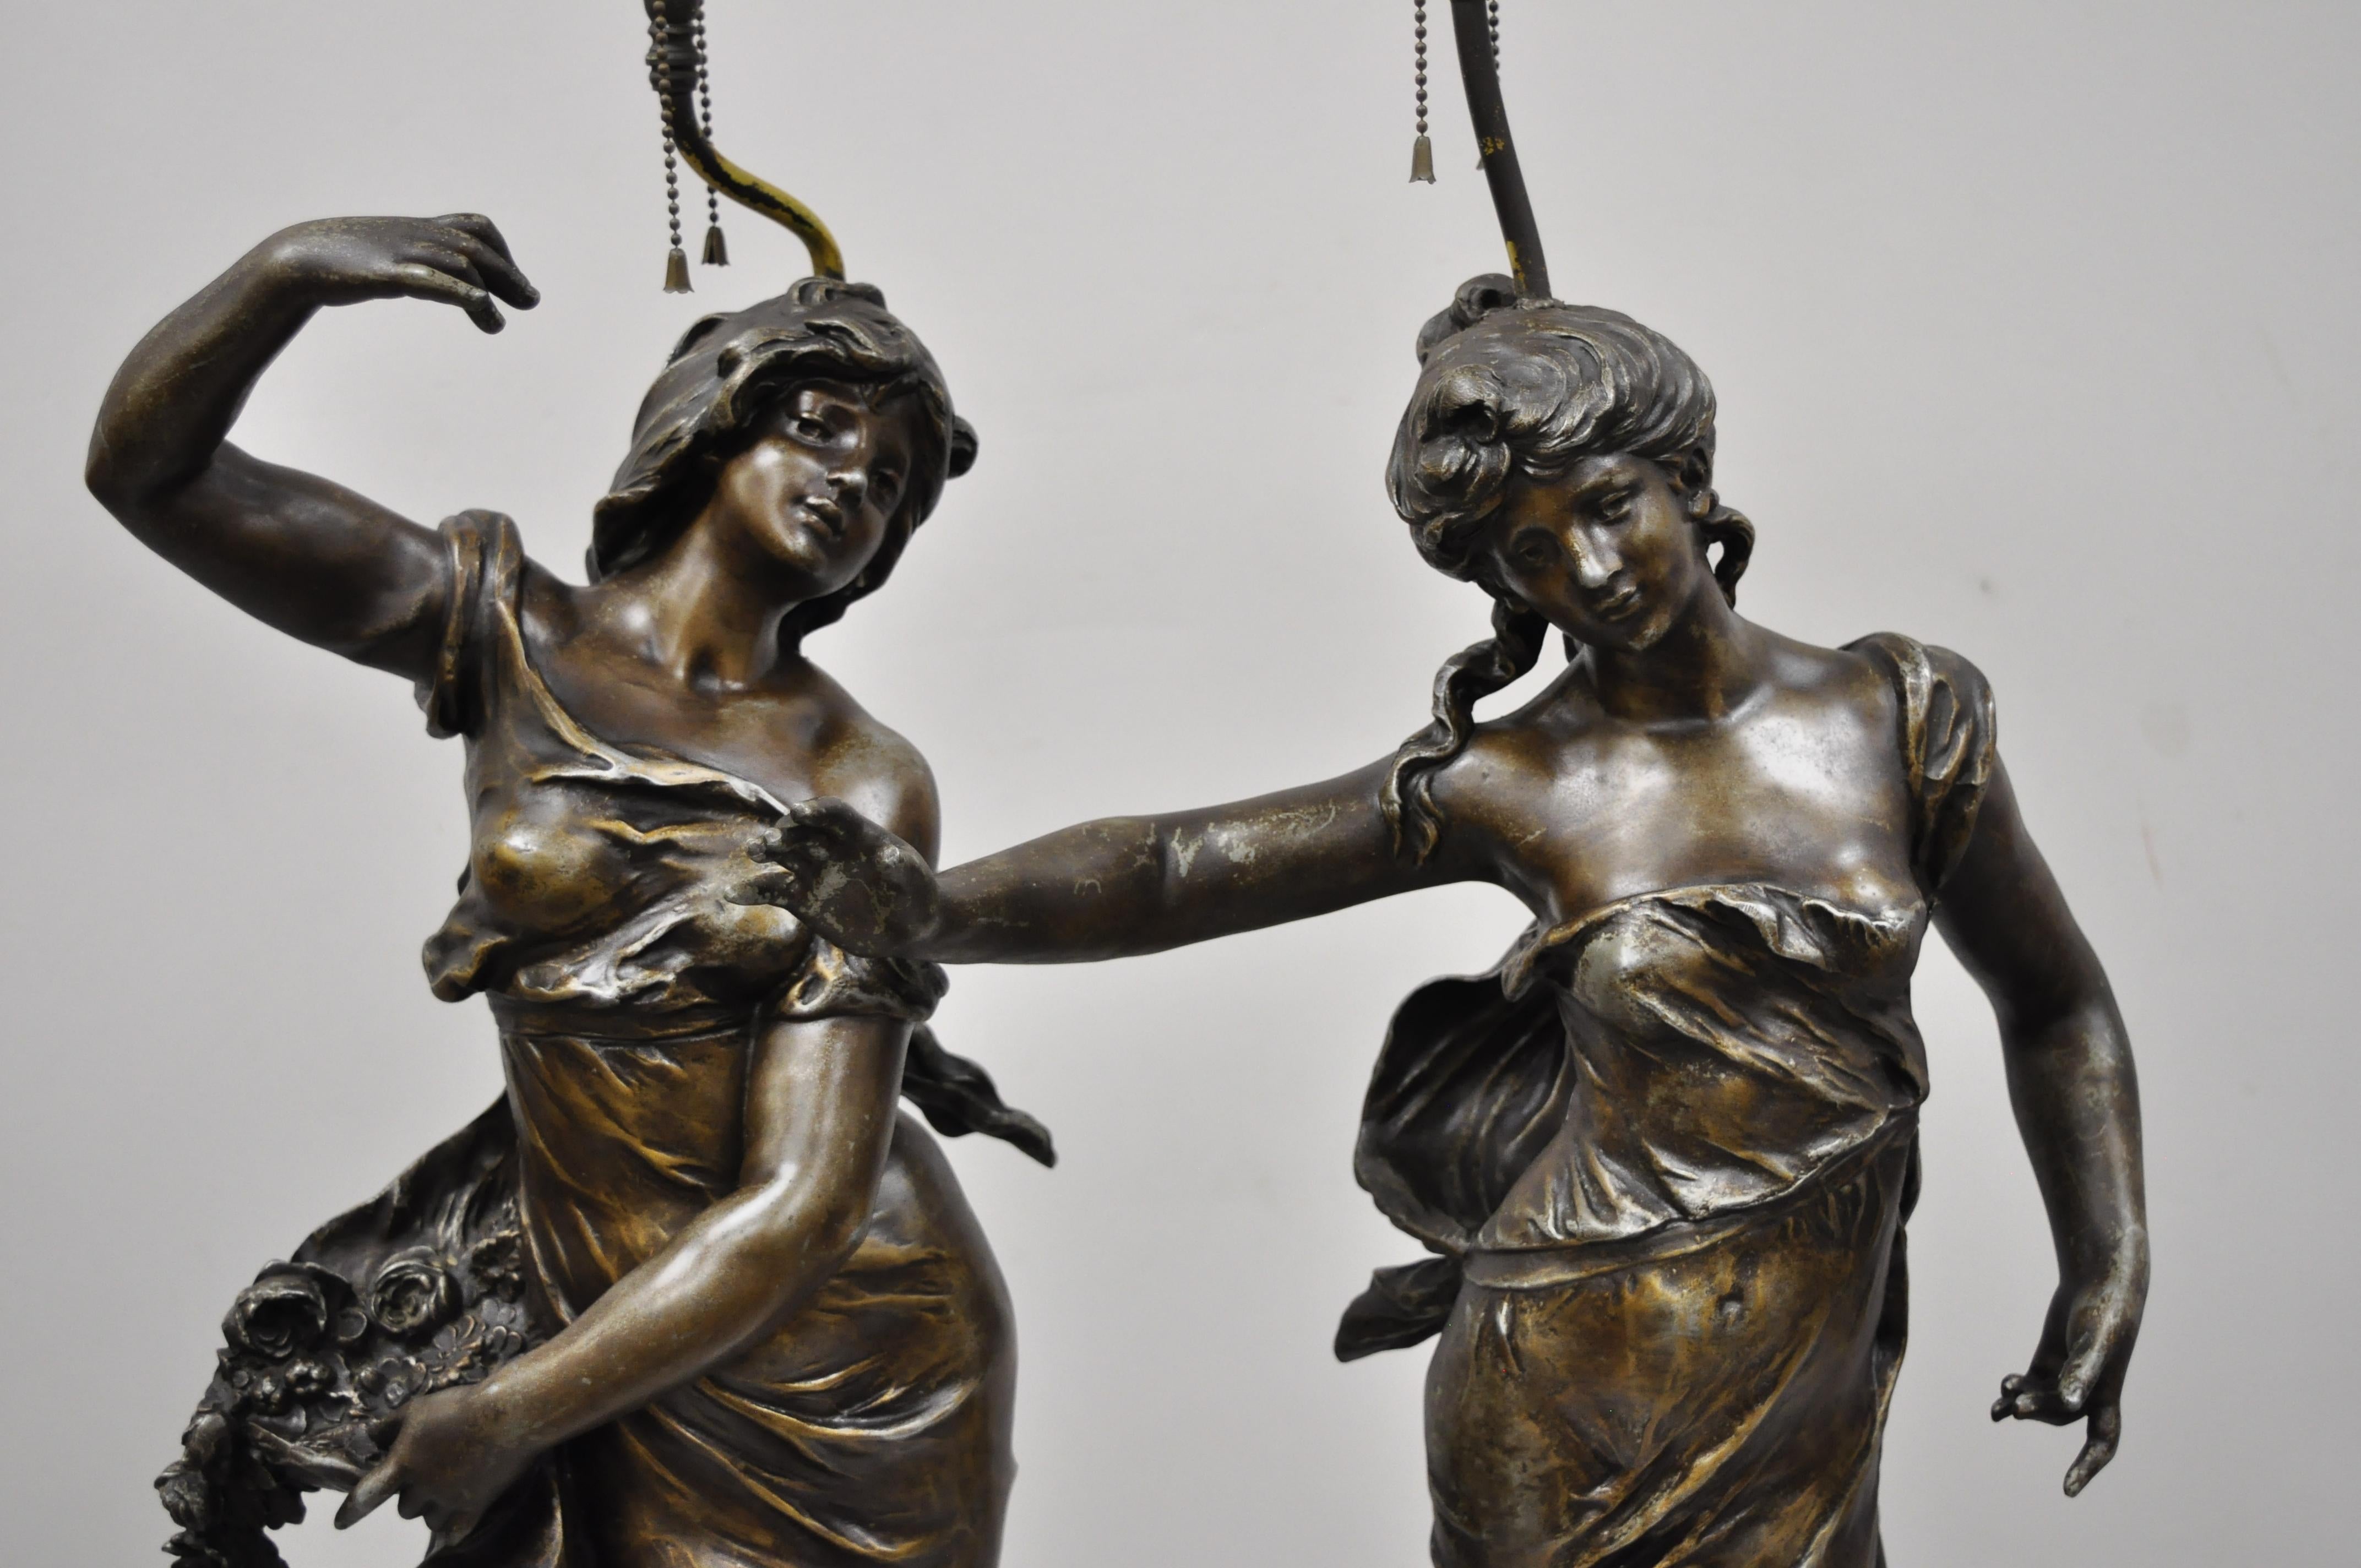 Pair of 19th century antique Spelter metal large figural French Victorian woman table lamps. Listing includes large impressive forms, double light sockets, marked 